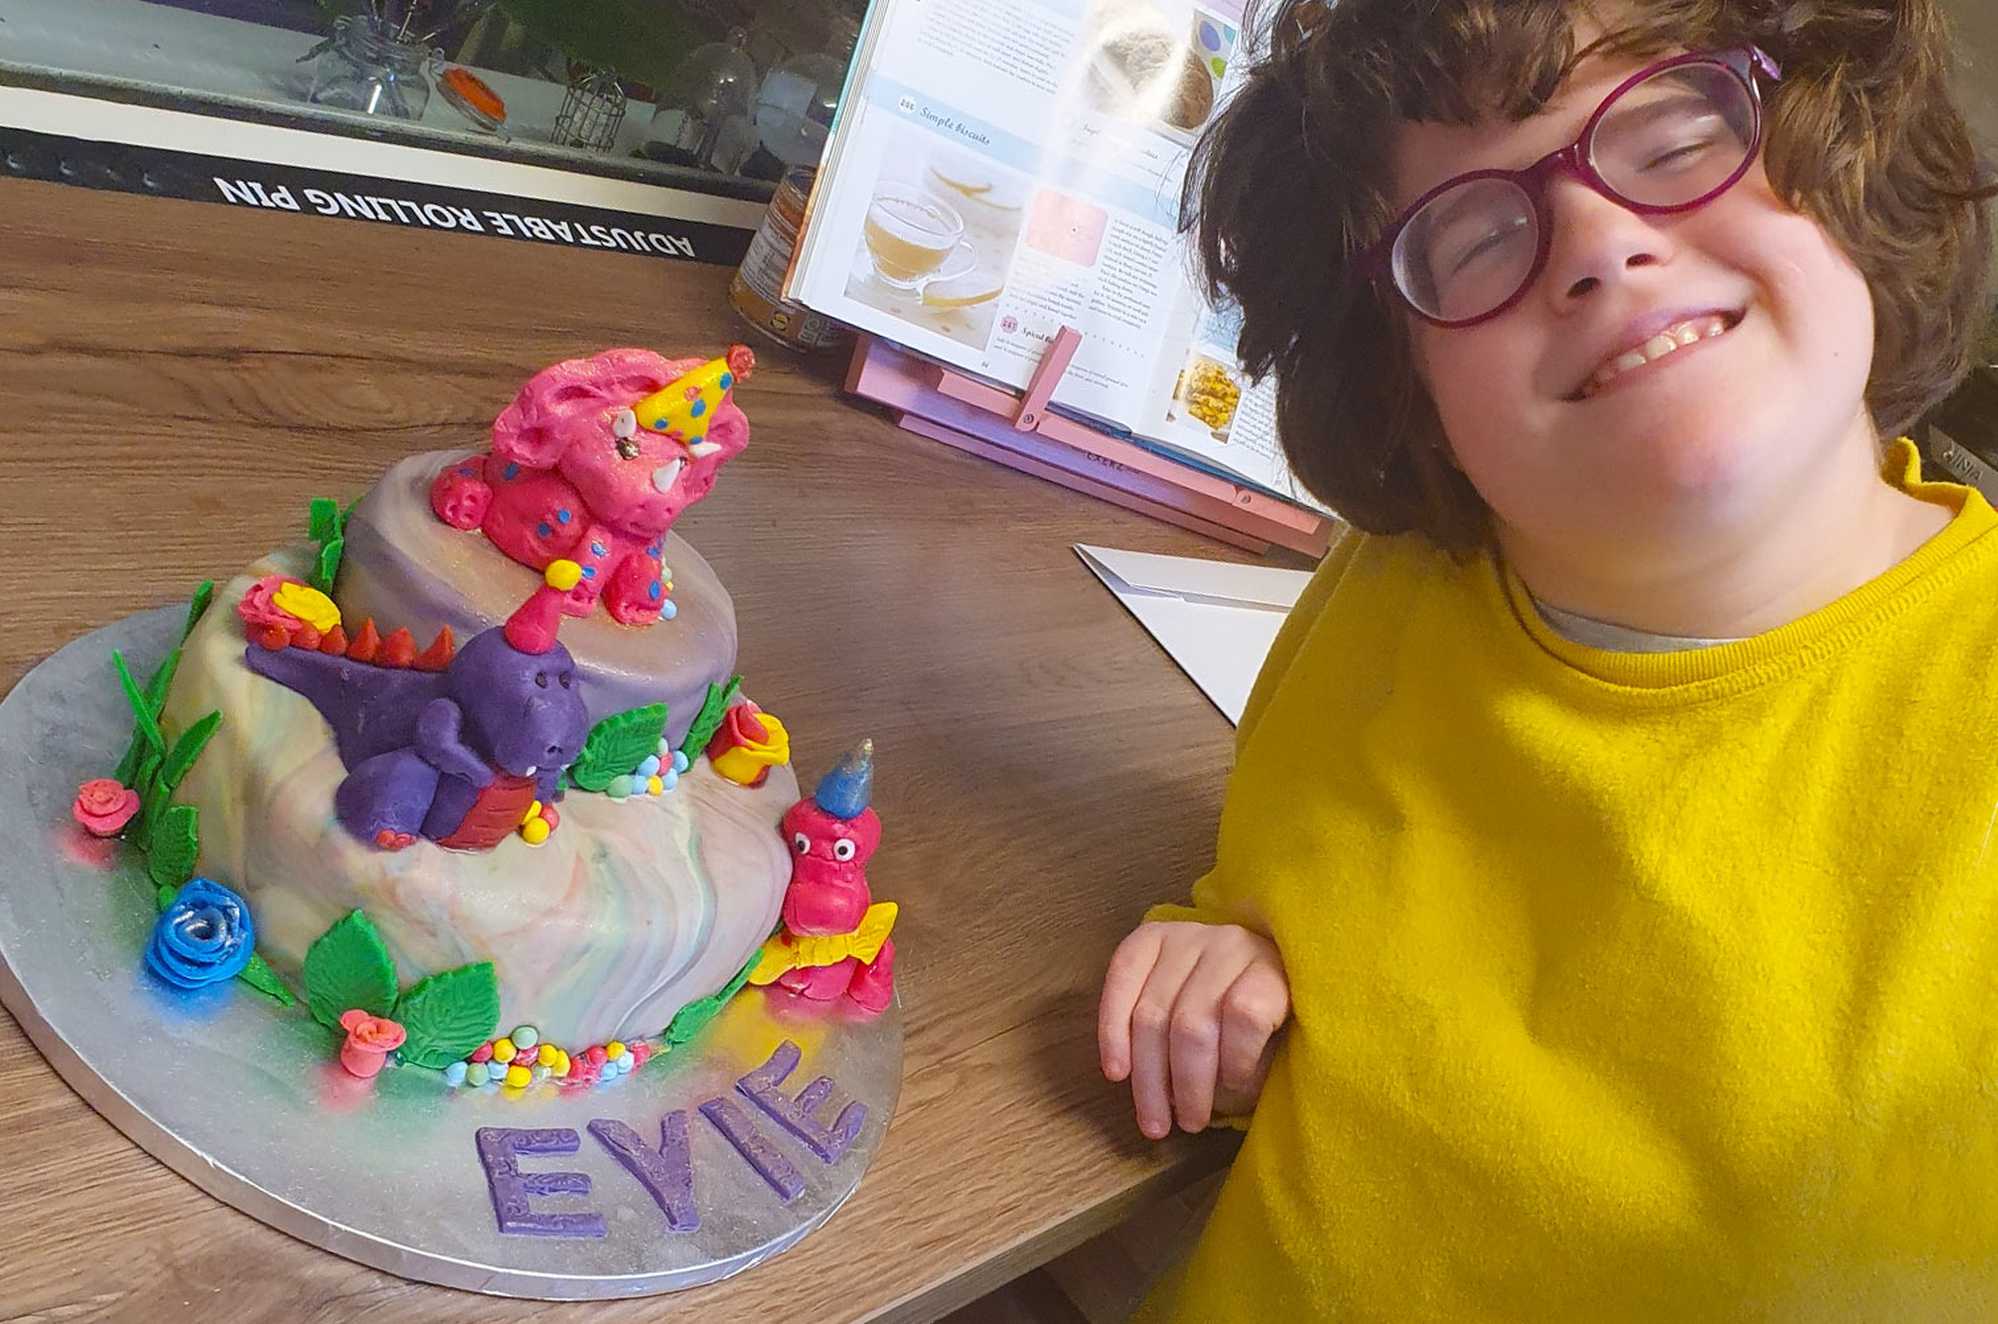 A smiling Dakota, proudly showing off a dinosaur-themed cake she's made.